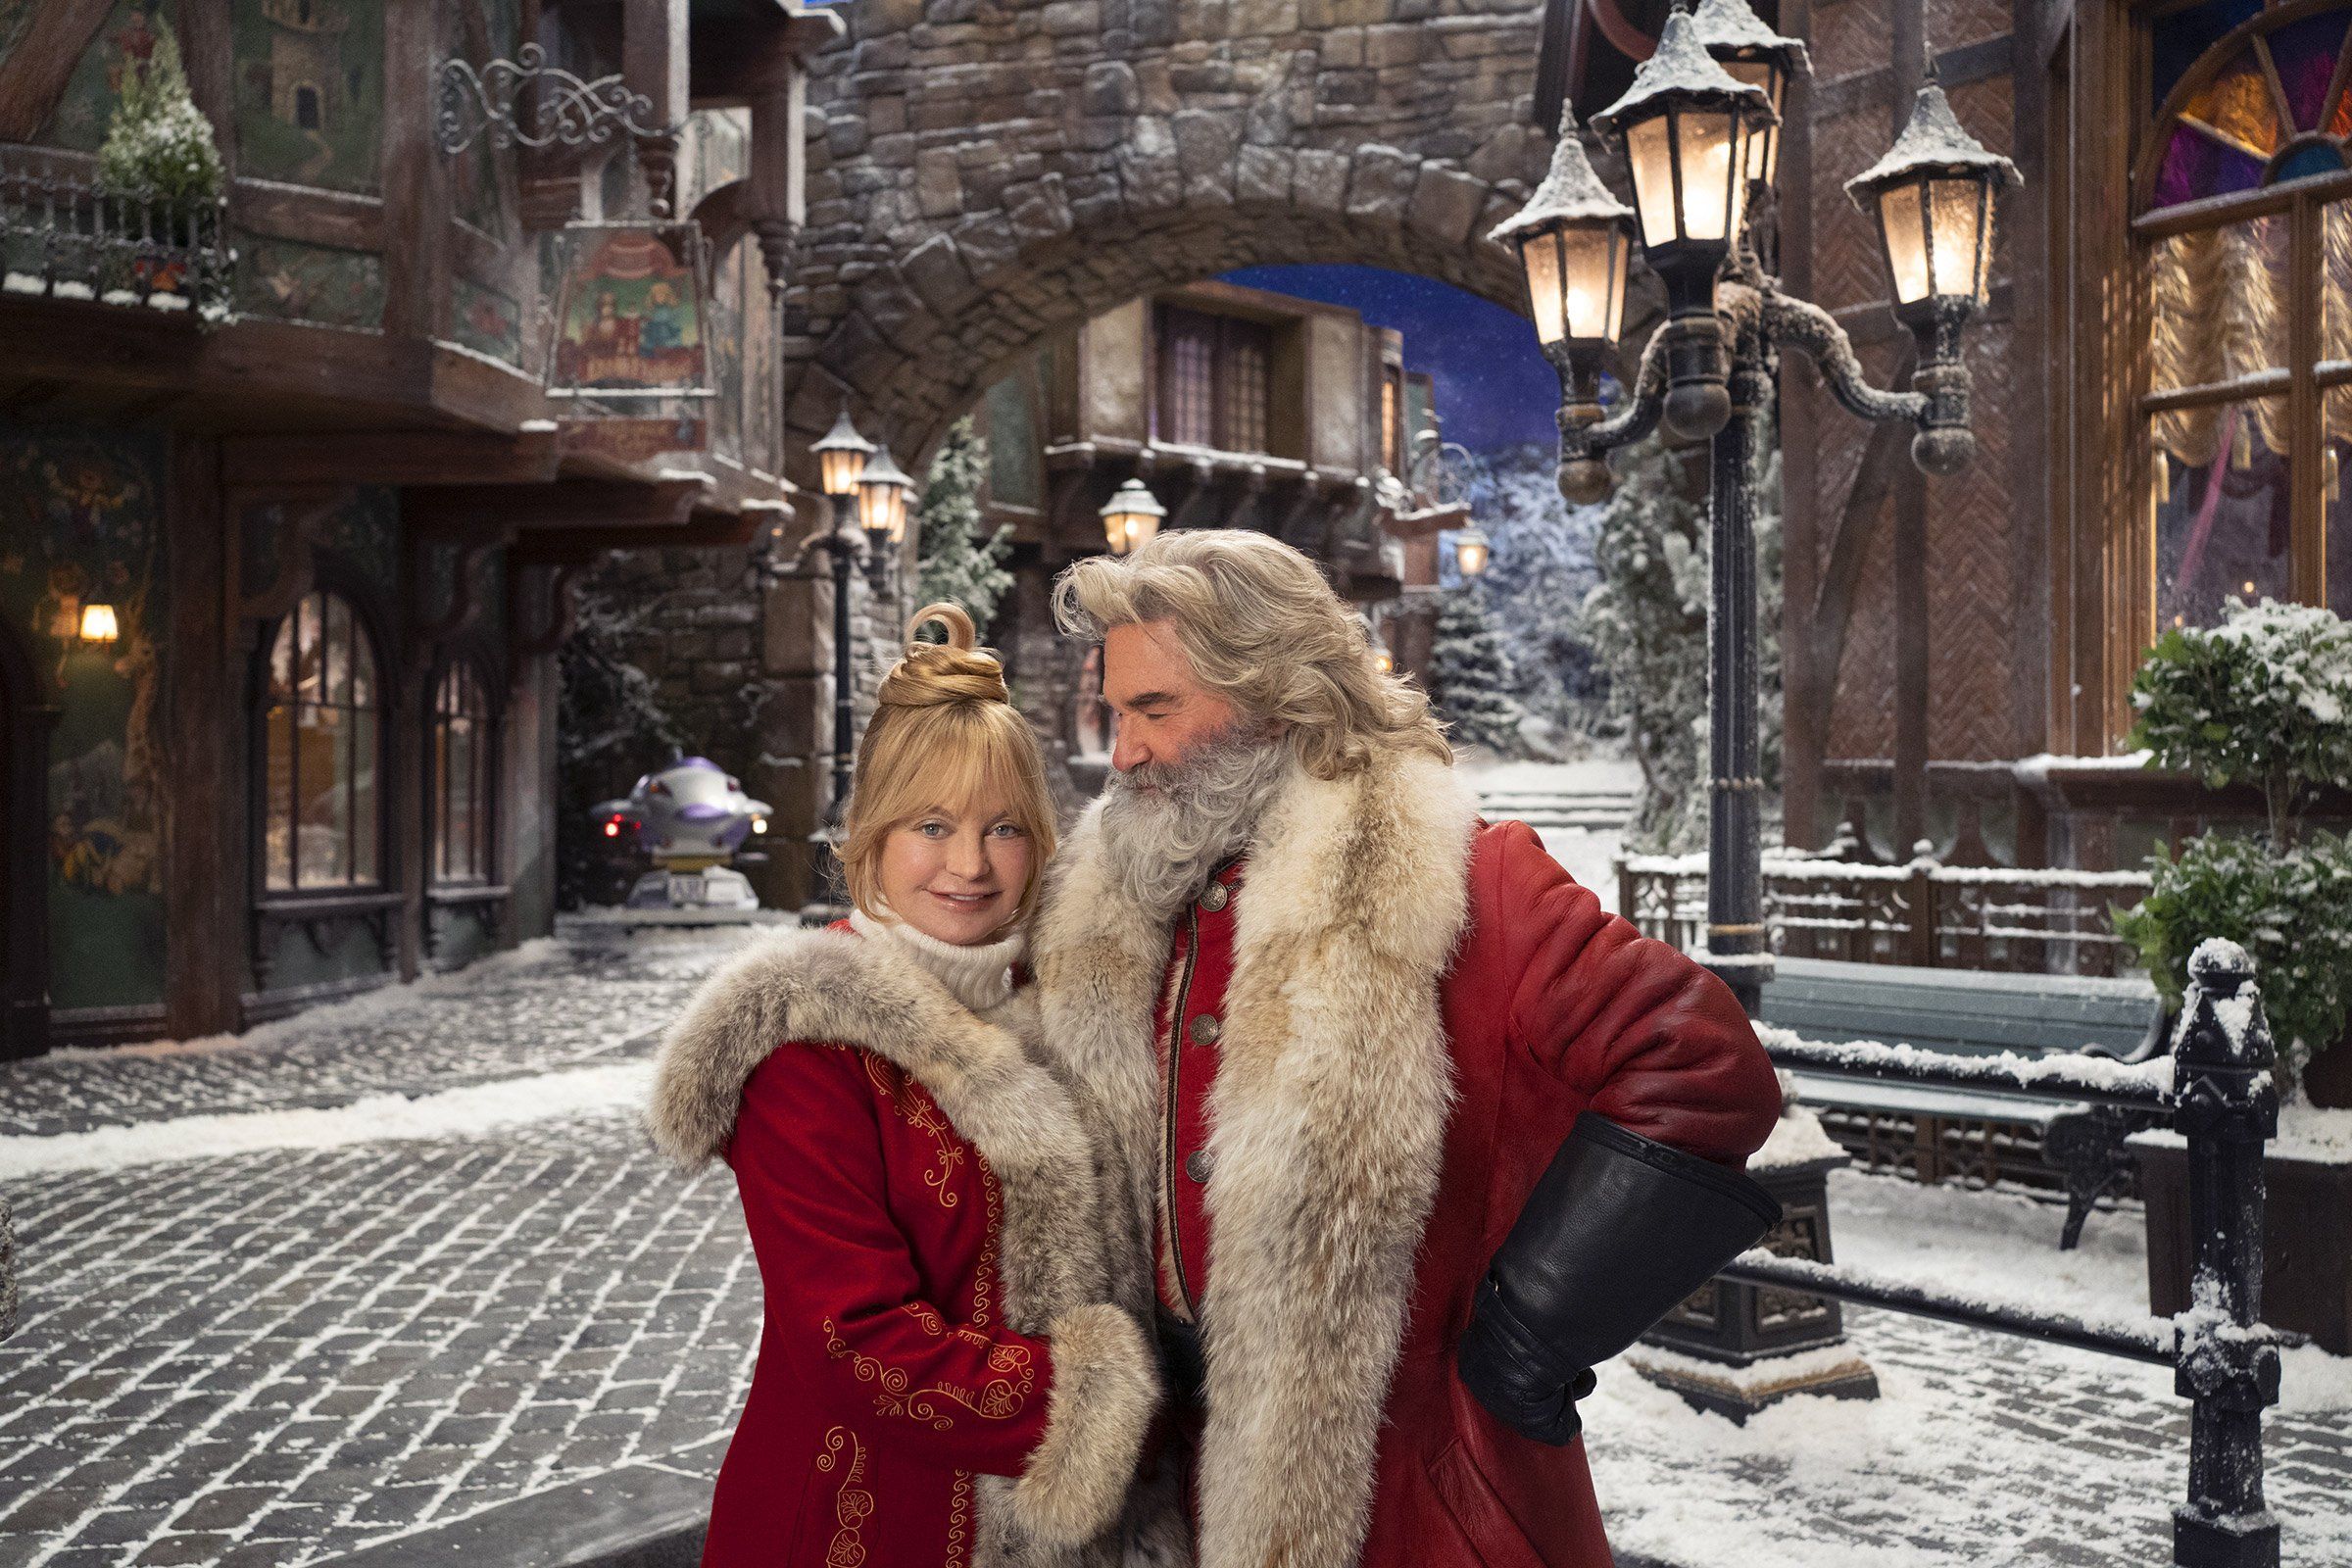 Netflix Confirms ‘The Christmas Chronicles 2’ Starring Kurt Russell And Goldie Hawn